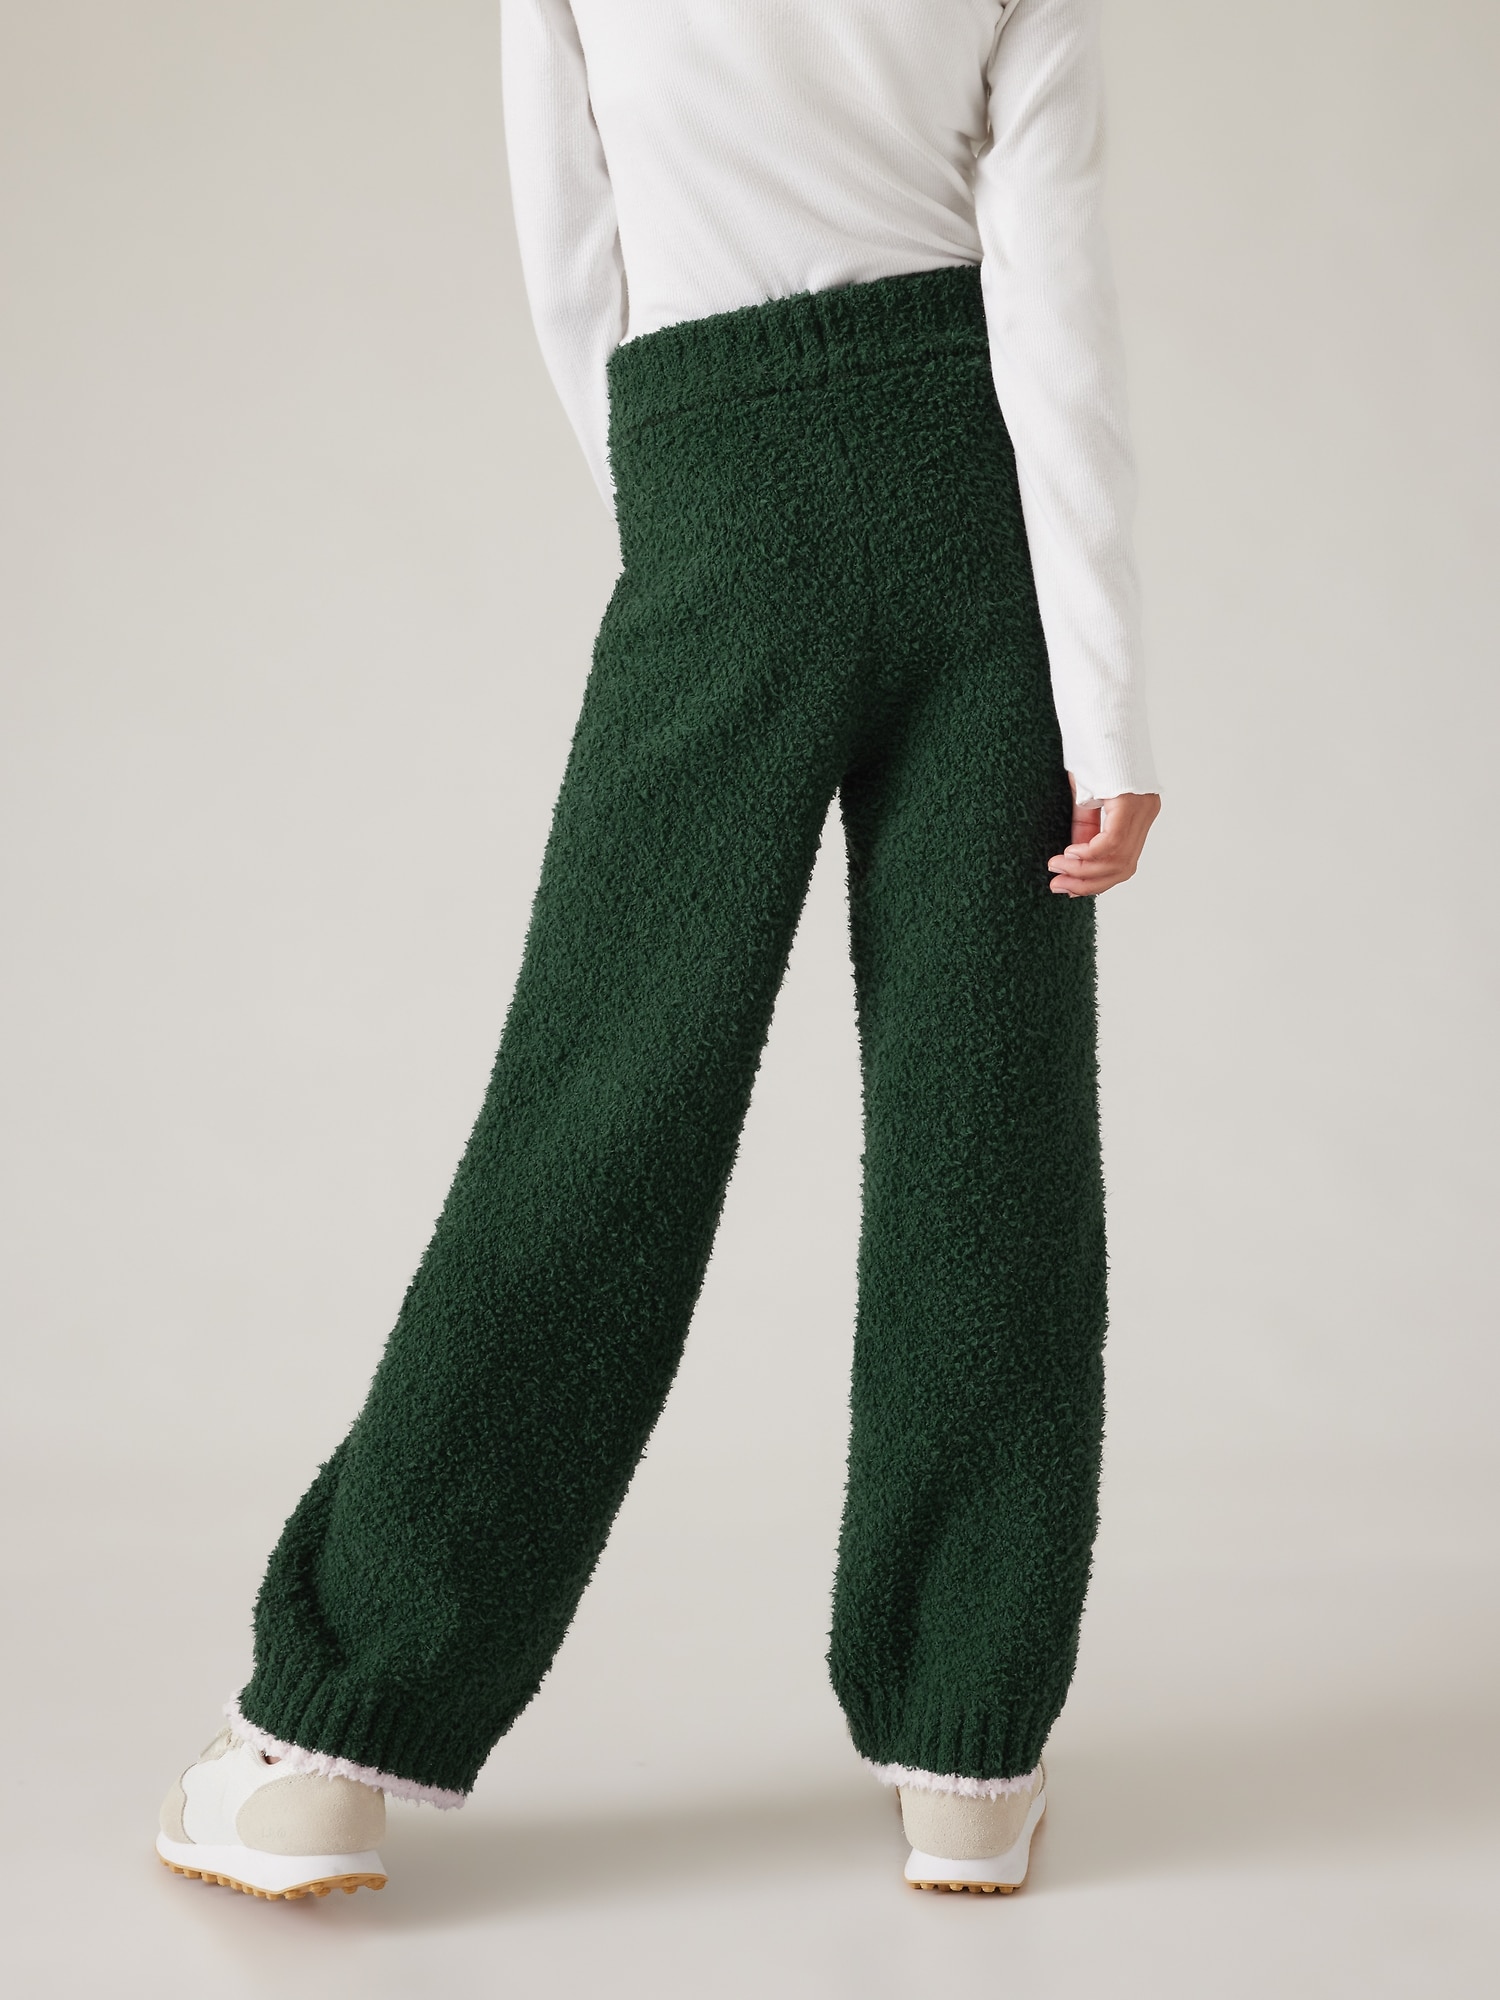 Polyester Loop Knit Pants Women's Track Pant, Model Name/Number